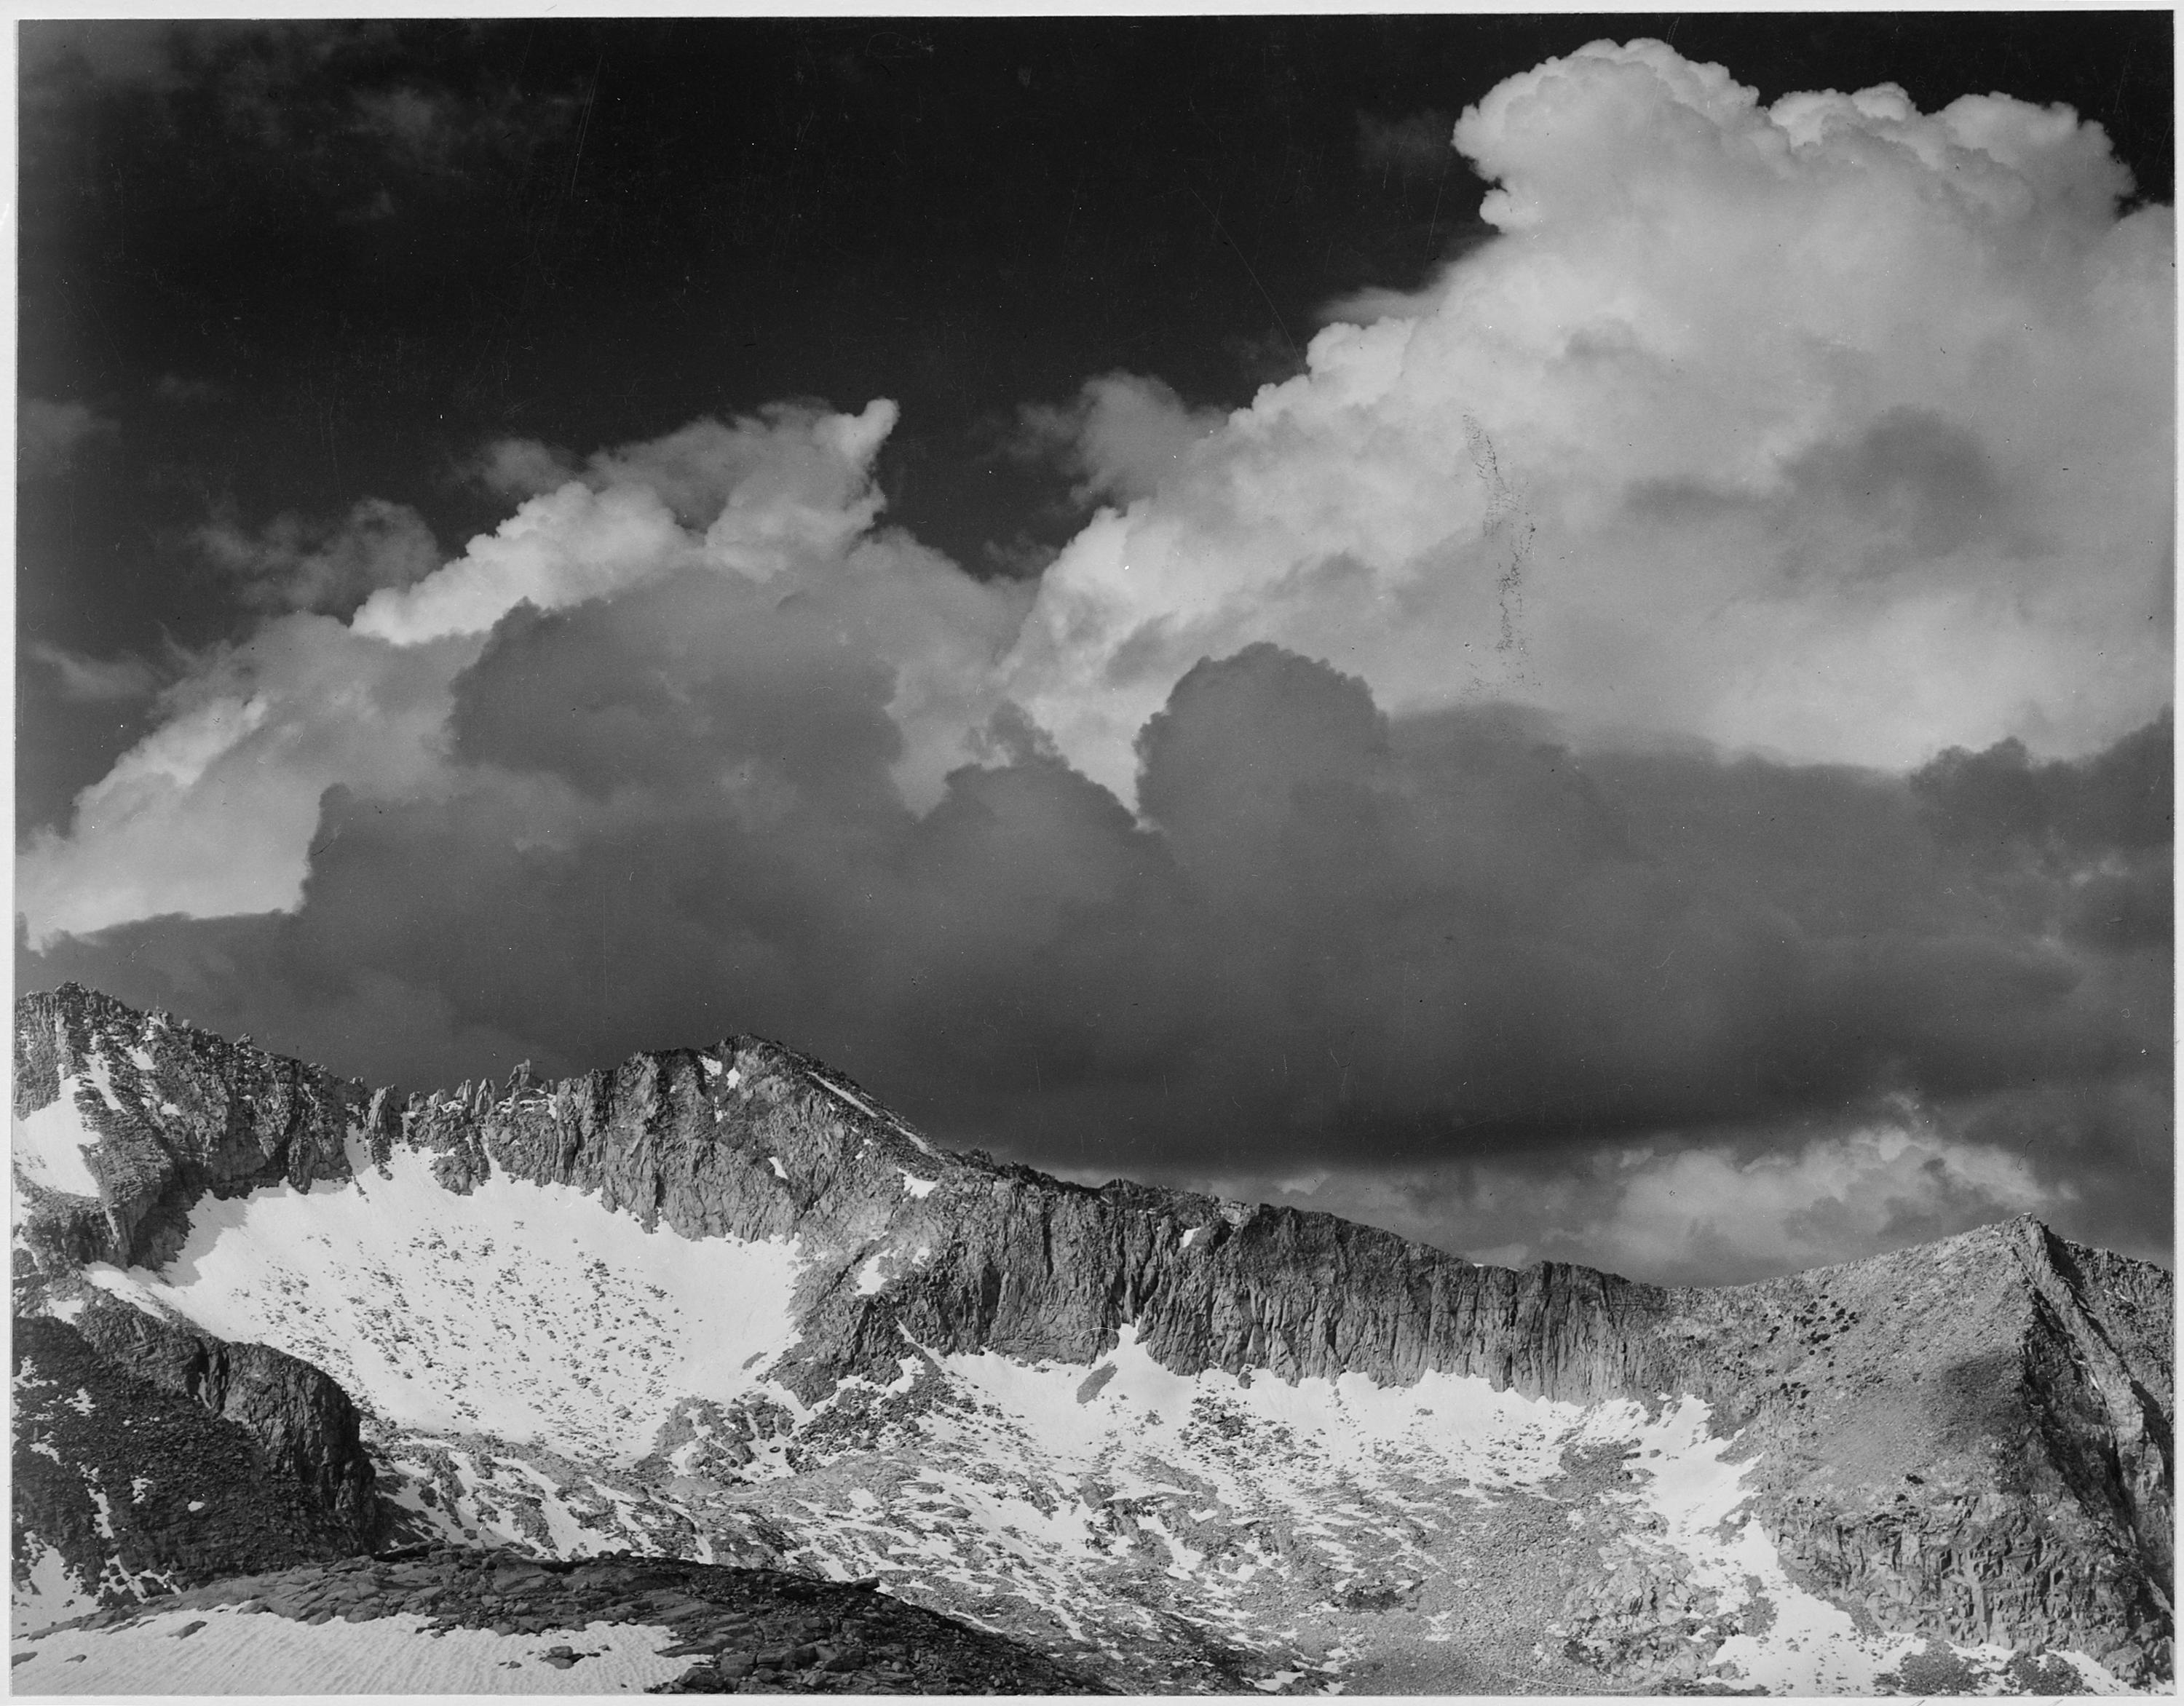 Ansel Adams - National Archives 79-AA-H16